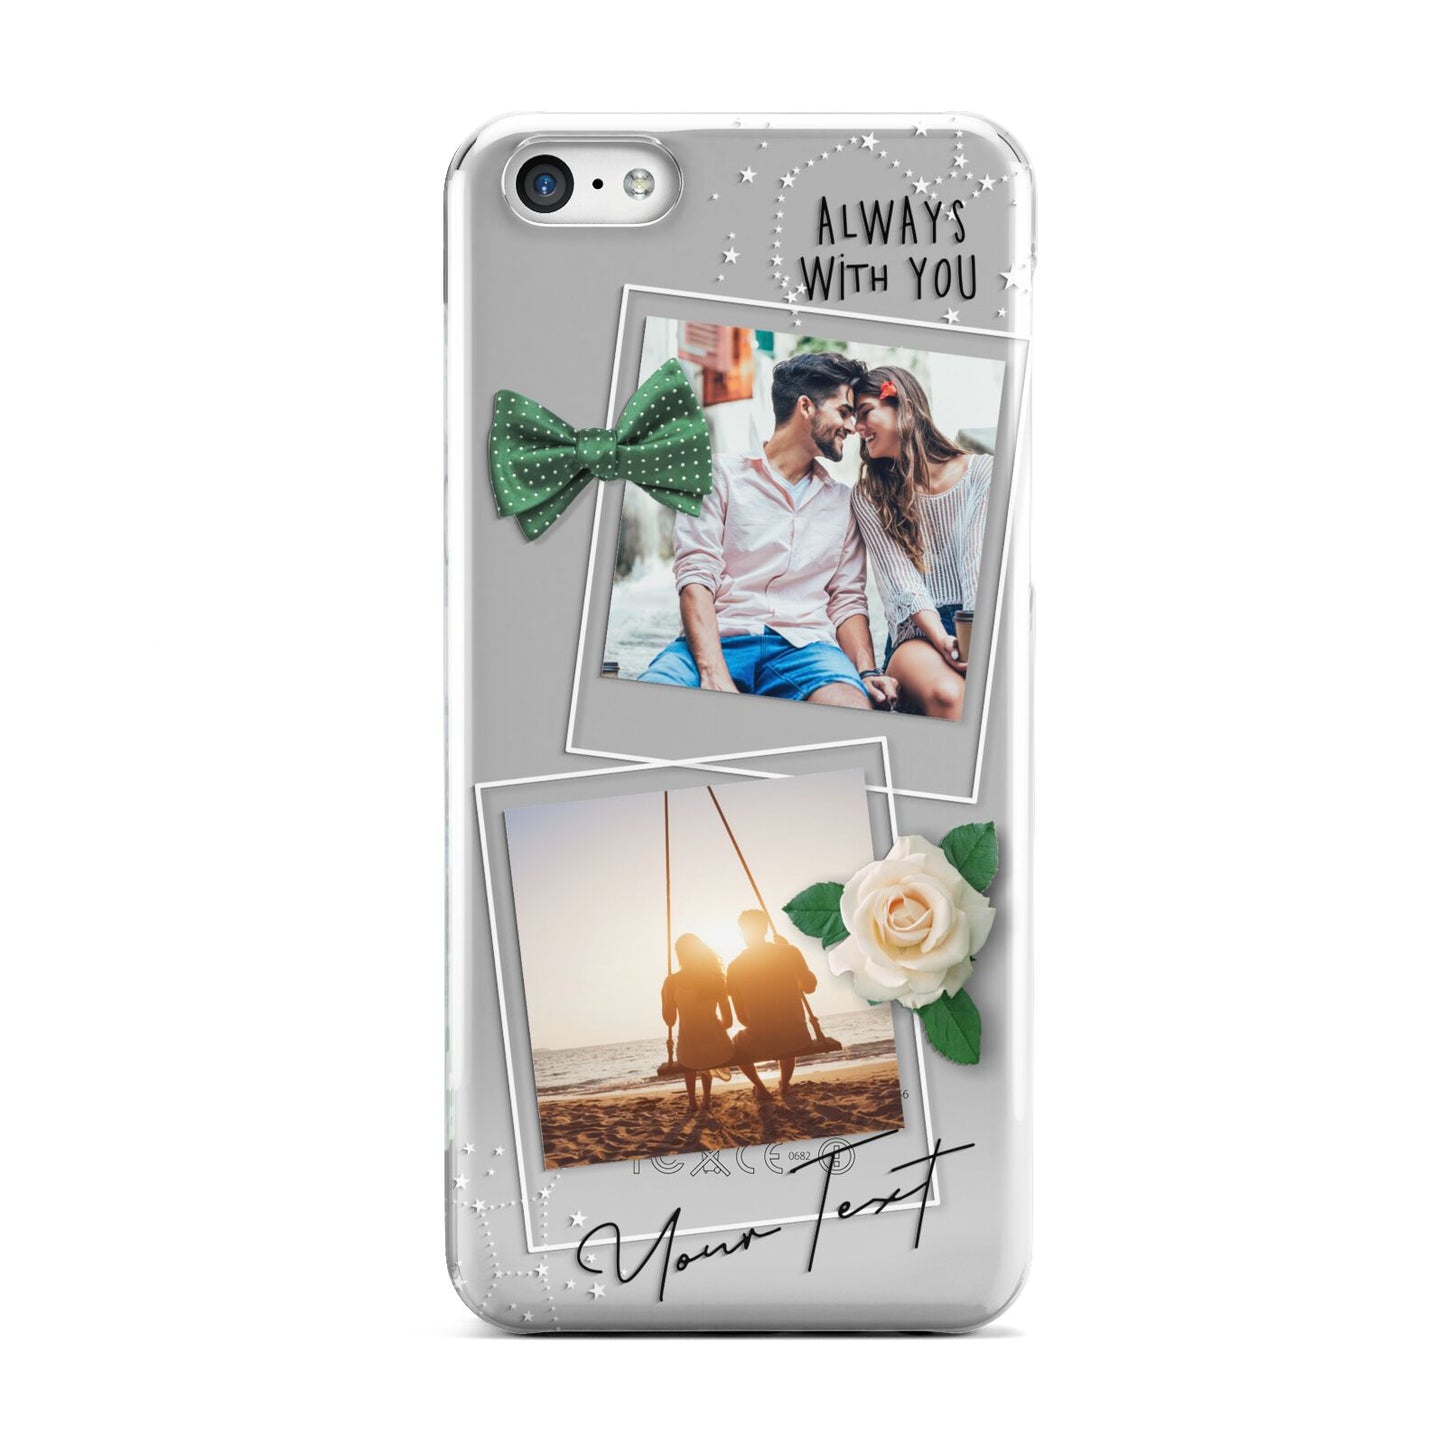 Astrology Photo Montage Upload with Text Apple iPhone 5c Case